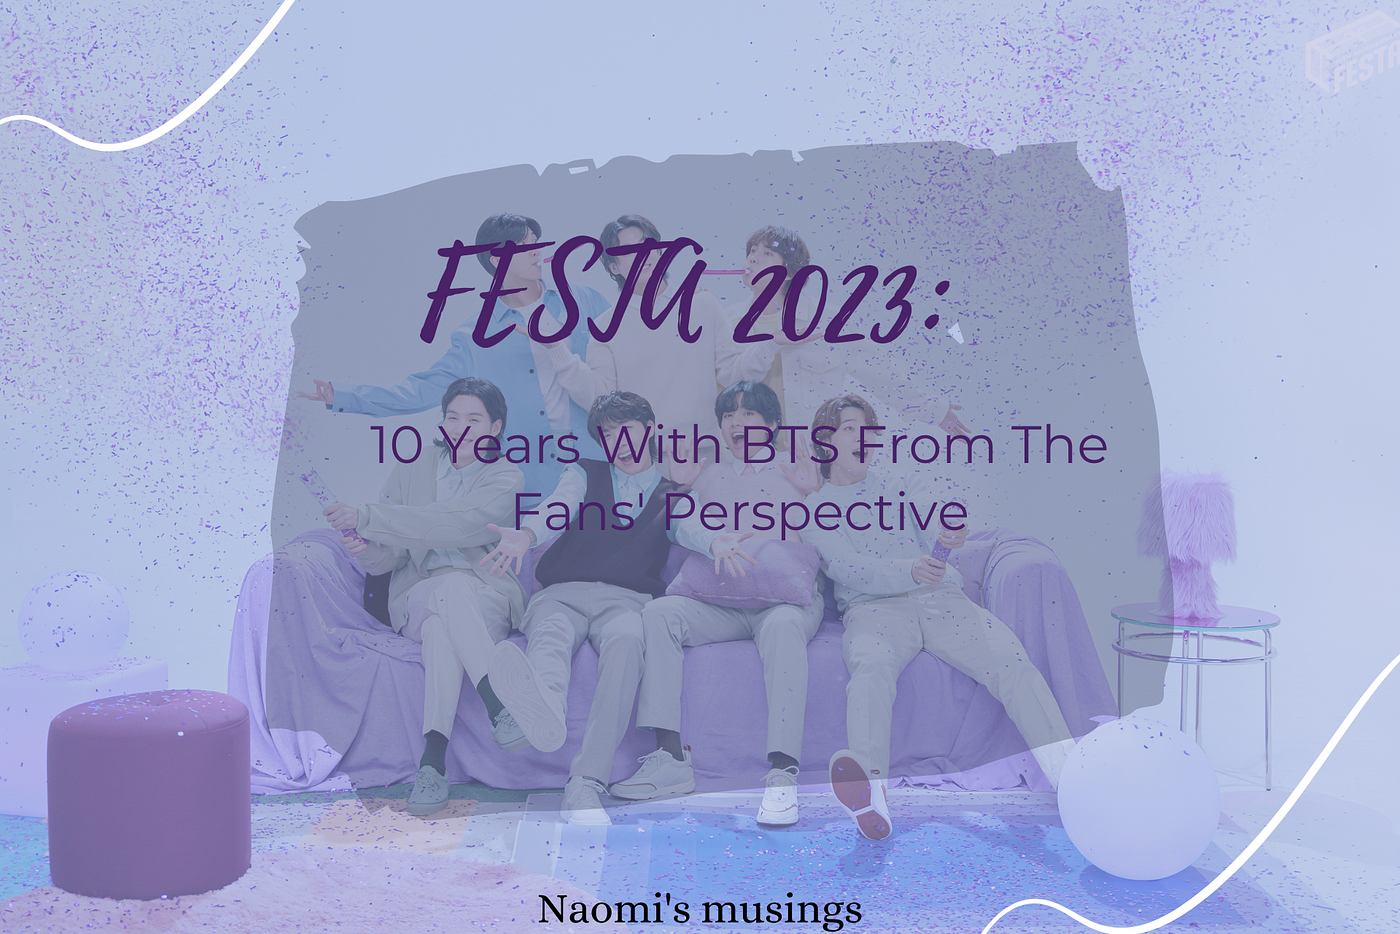 BTS Festa 2023: BTS' RM and Jungkook to host events on 10th debut